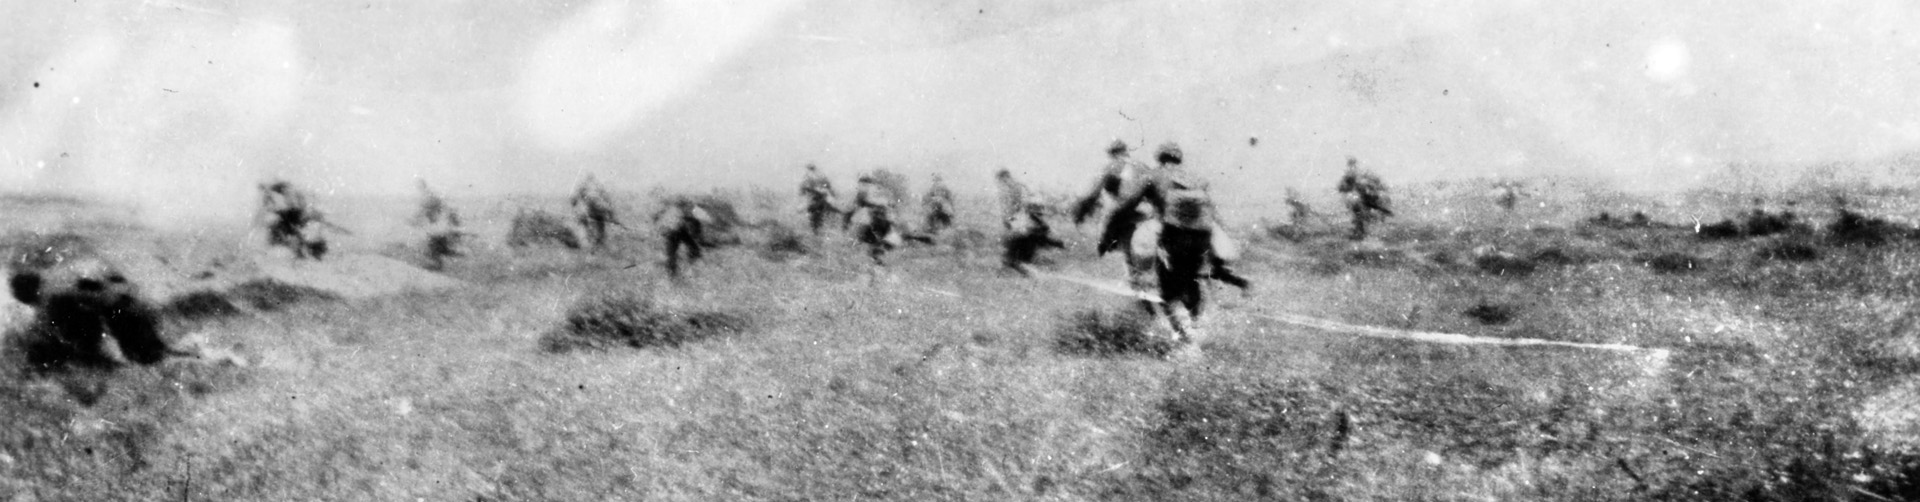 British soldiers attack during the Third Battle of Krithia in June 1915. The assault on June 4 was the final in a series of Allied attacks against the Turkish defenses five miles north of Cape Helles.